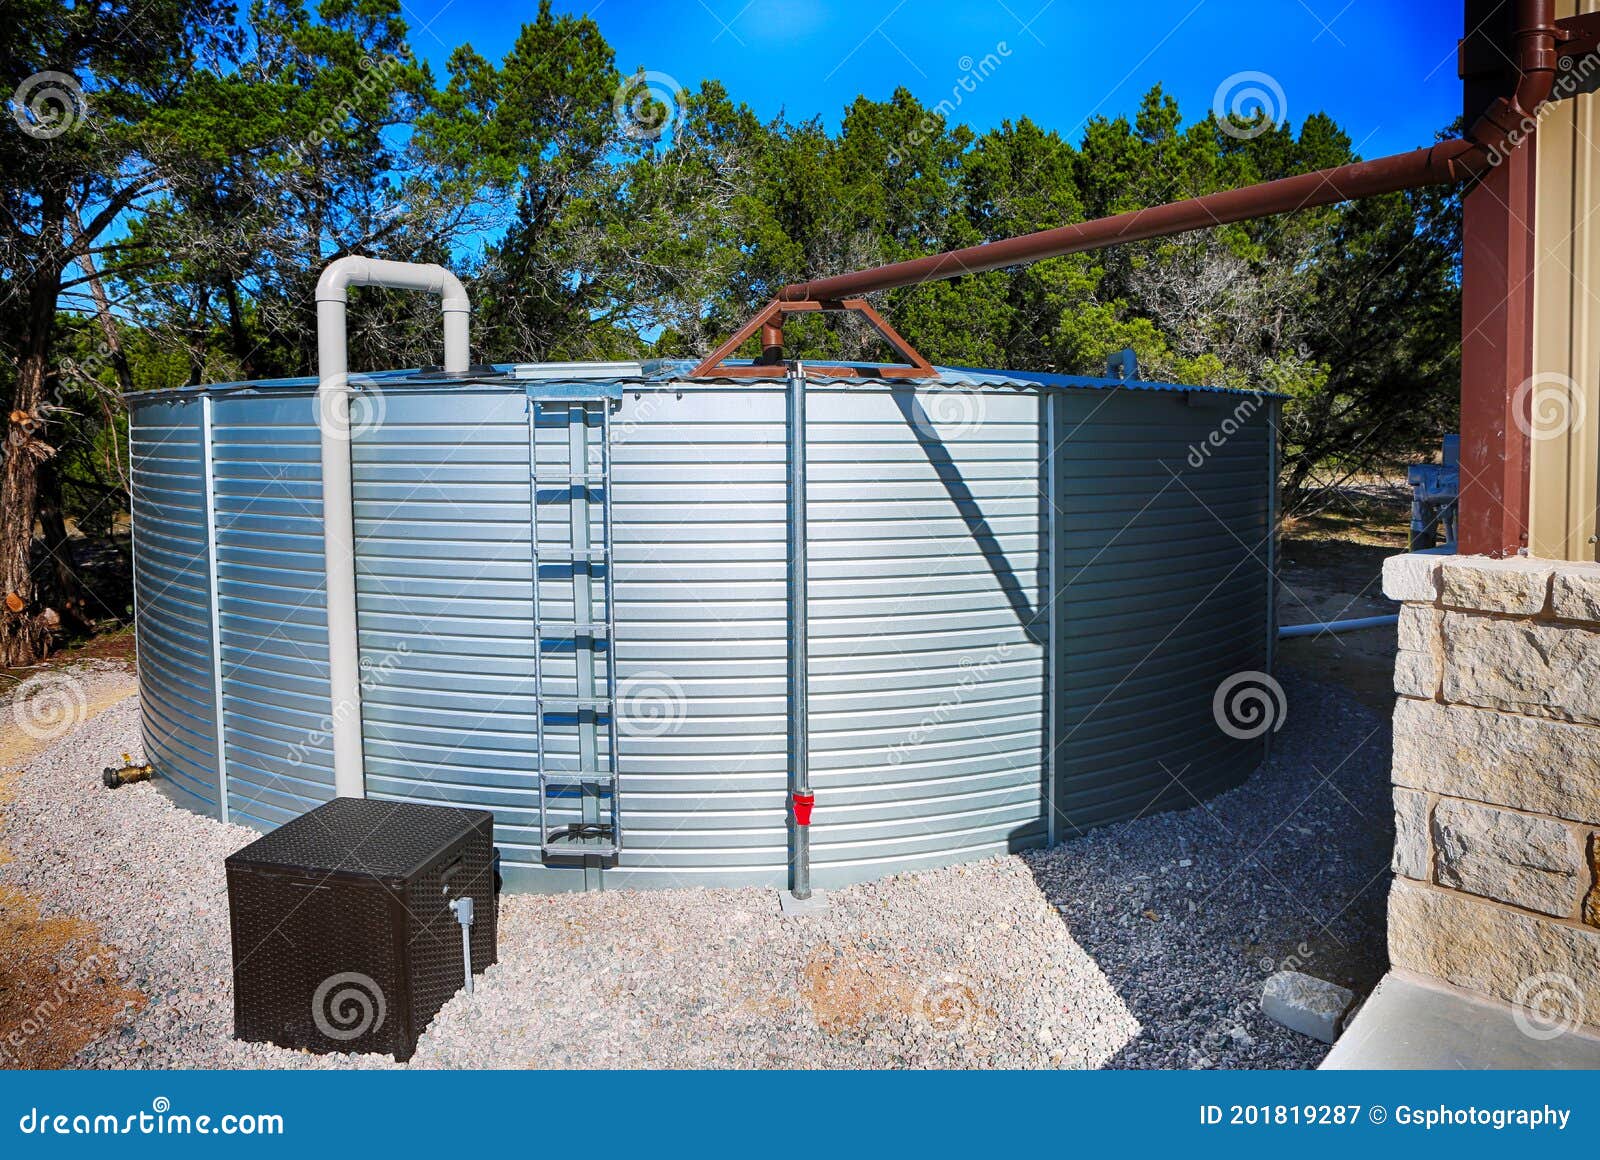 163 Collector Rain Water Photos Free Royalty Free Stock Photos From Dreamstime